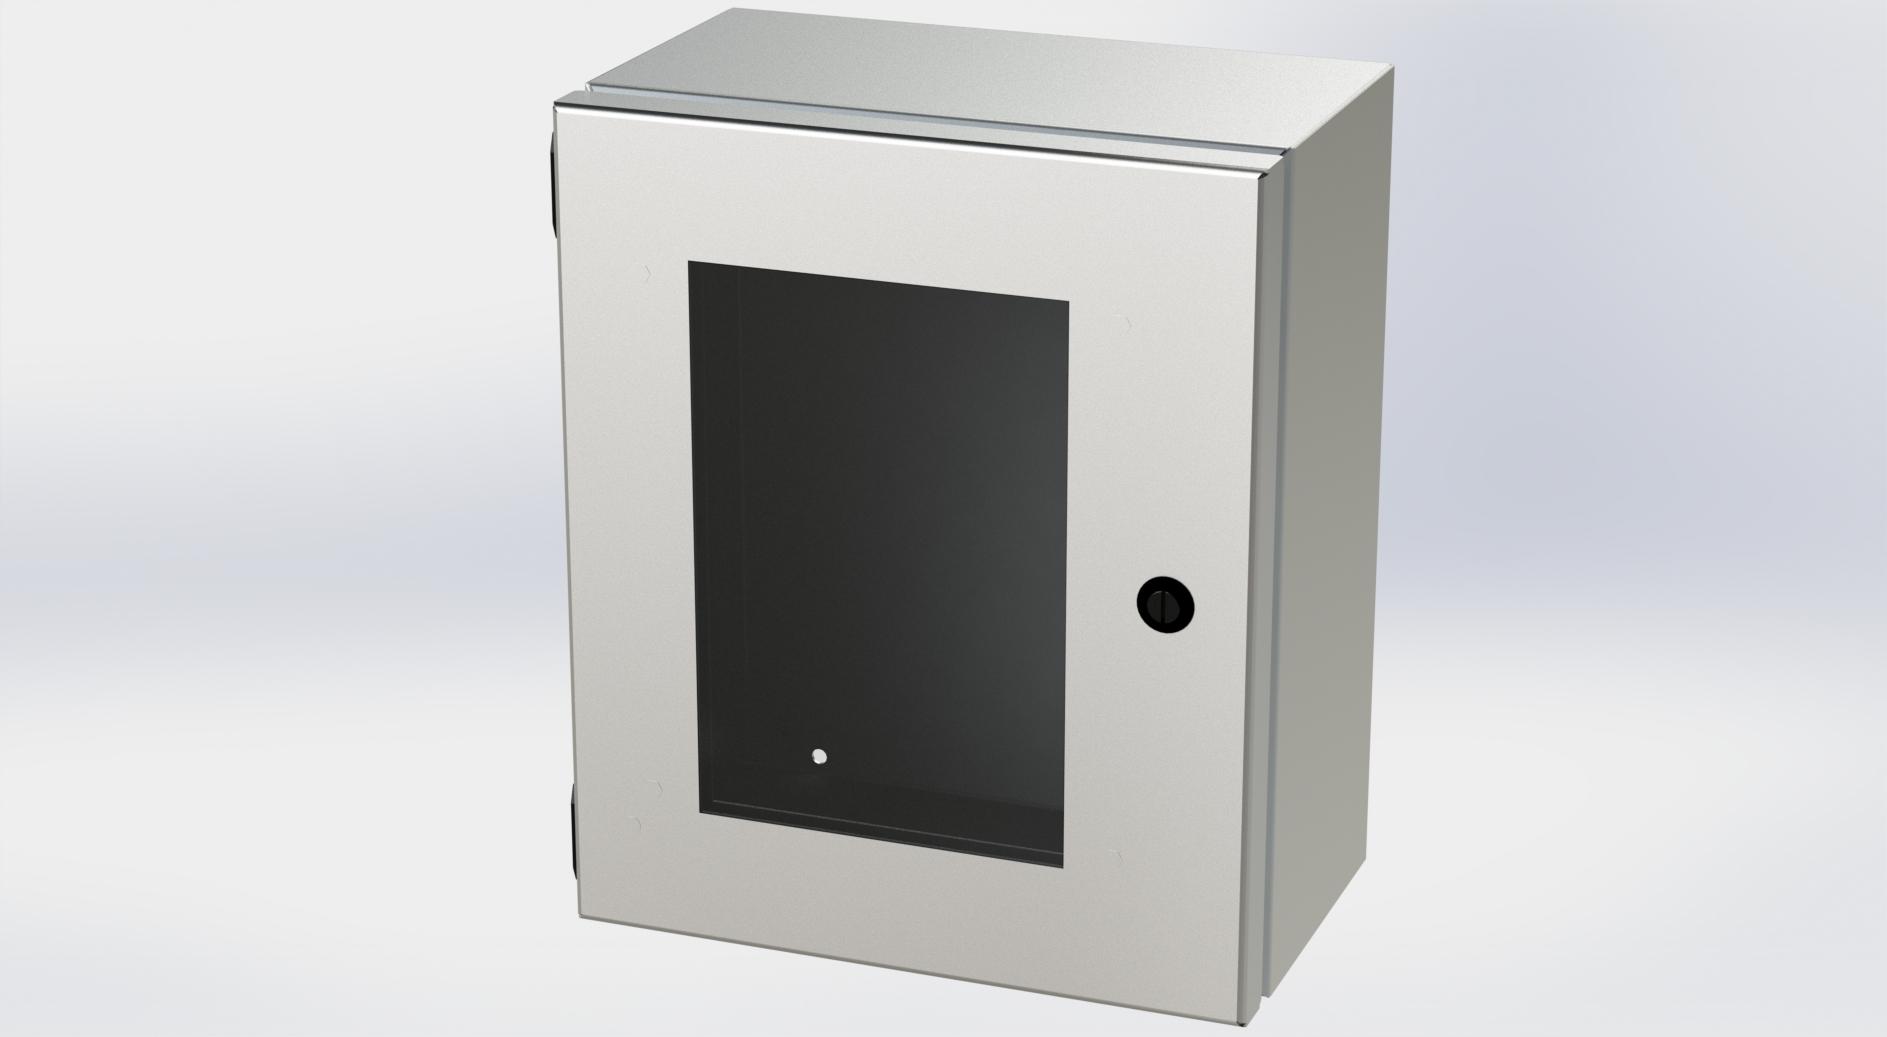 Saginaw Control SCE-1210ELJWSS S.S. ELJ Enclosure W/Viewing Window, Height:12.00", Width:10.00", Depth:6.00", #4 brushed finish on all exterior surfaces. Optional sub-panels are powder coated white.